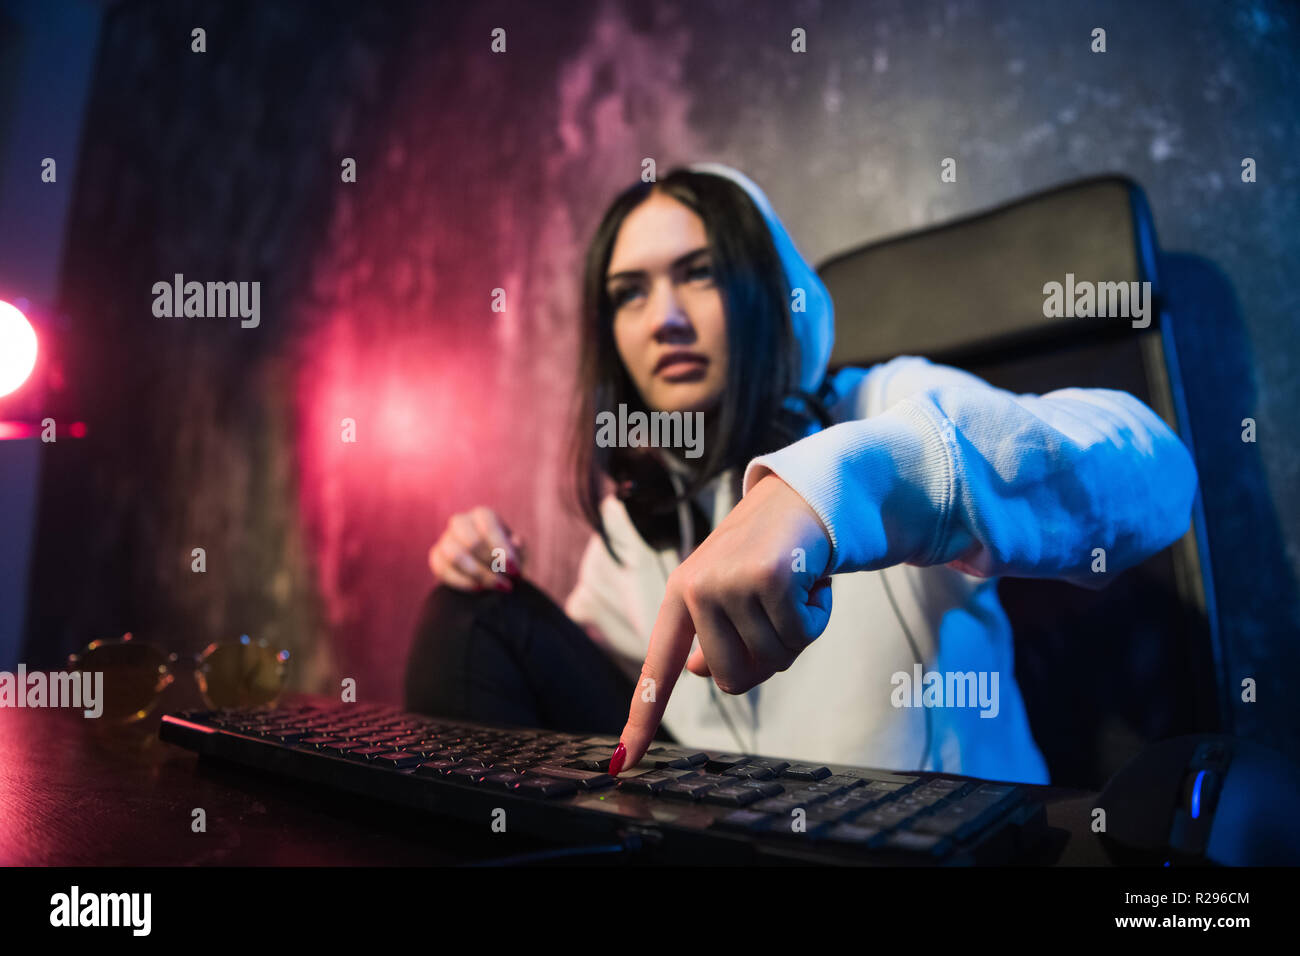 Woman in the hood sitting and working at laptop as hacker. Running malware program on computer in the internet with malevolent smile on her face Stock Photo